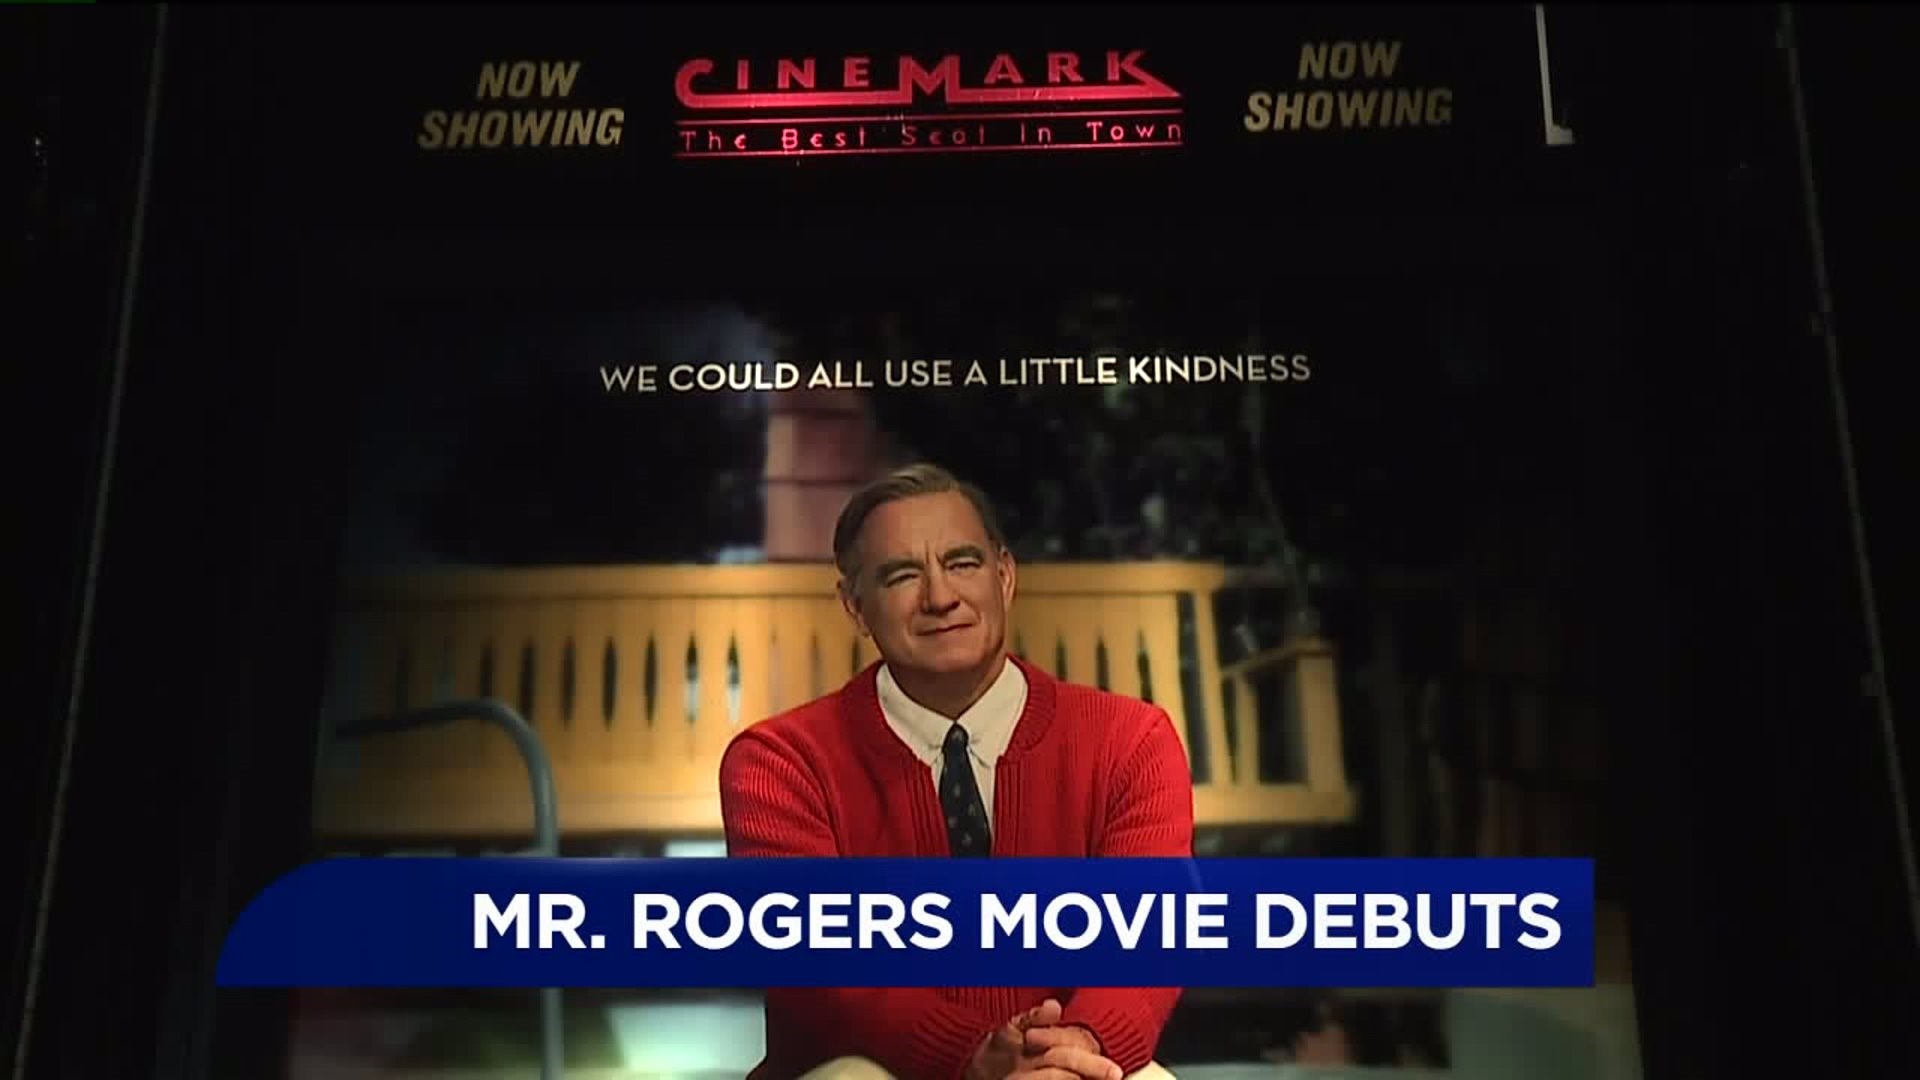 Film About Mister Rogers Hits the Silver Screen